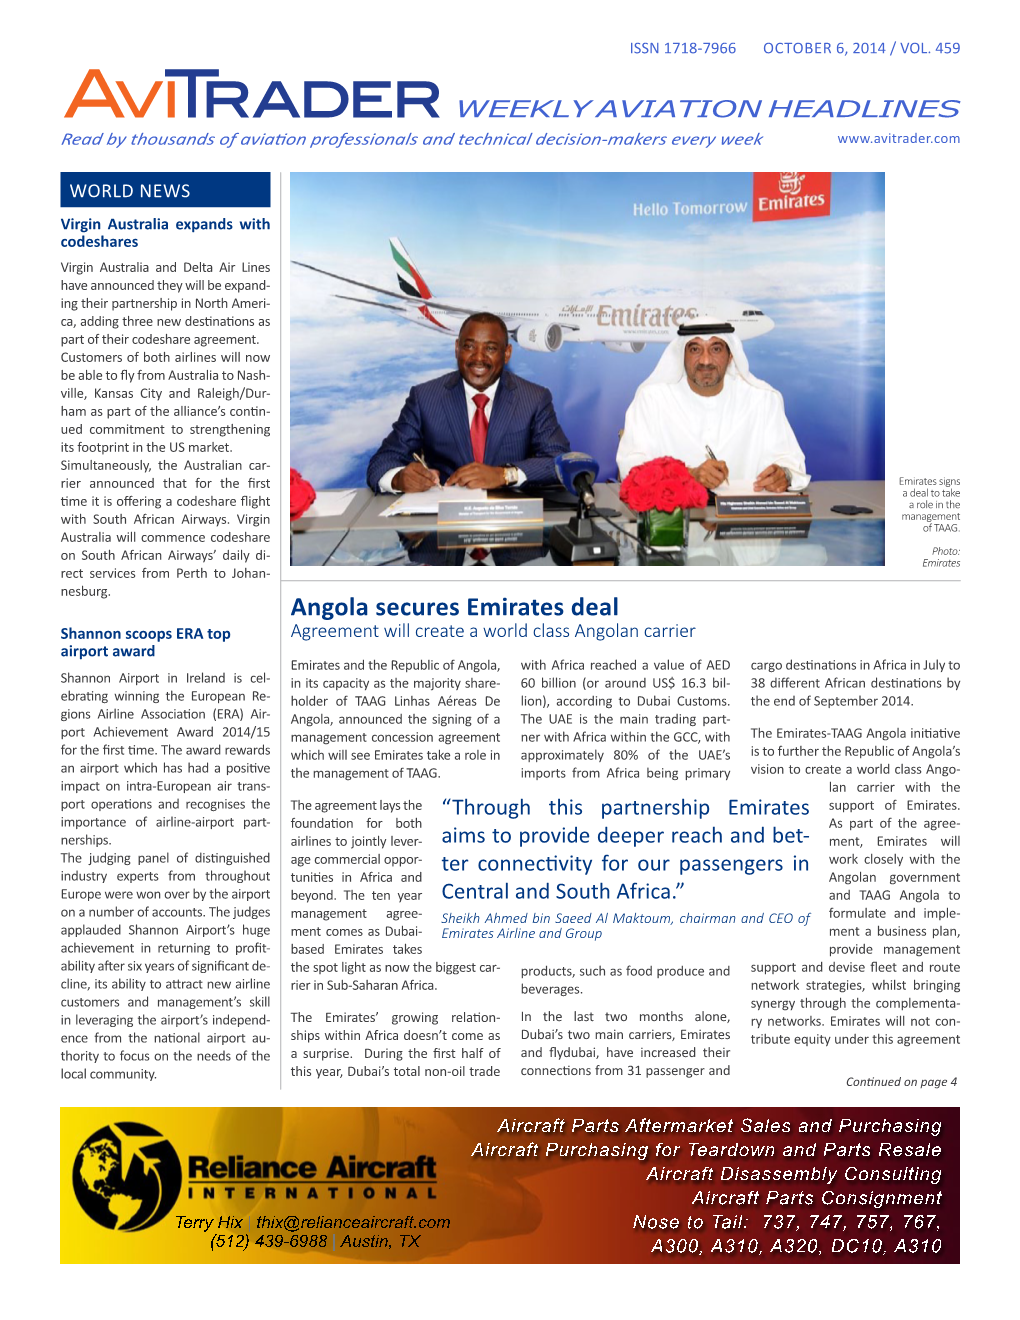 Angola Secures Emirates Deal